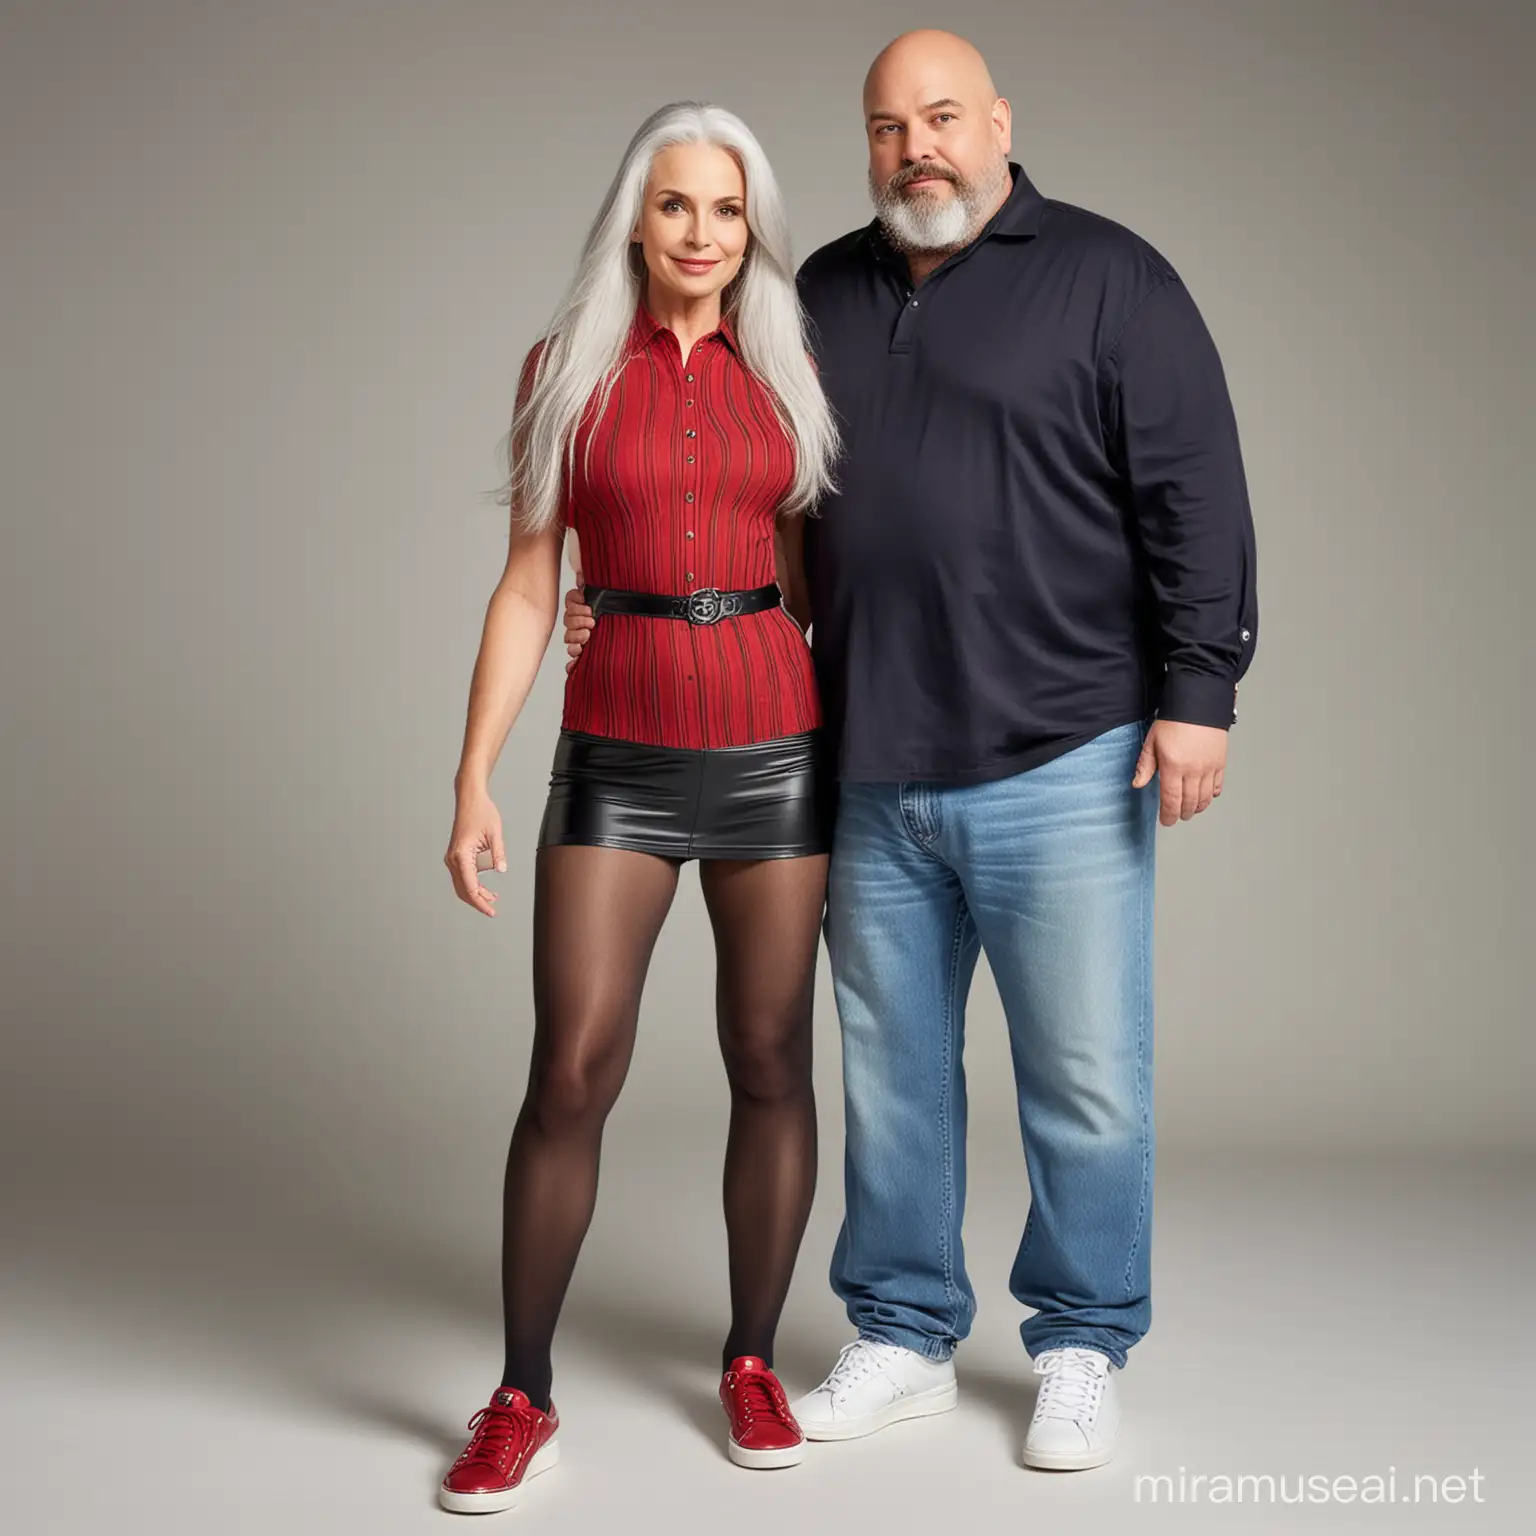 55 year old lady wearing black nylon tights pantyhose and red mini dress, long silver hair, white ked sneakers, holding hands with fat man, bald, man with goatee, wearing long jeans and button down shirt